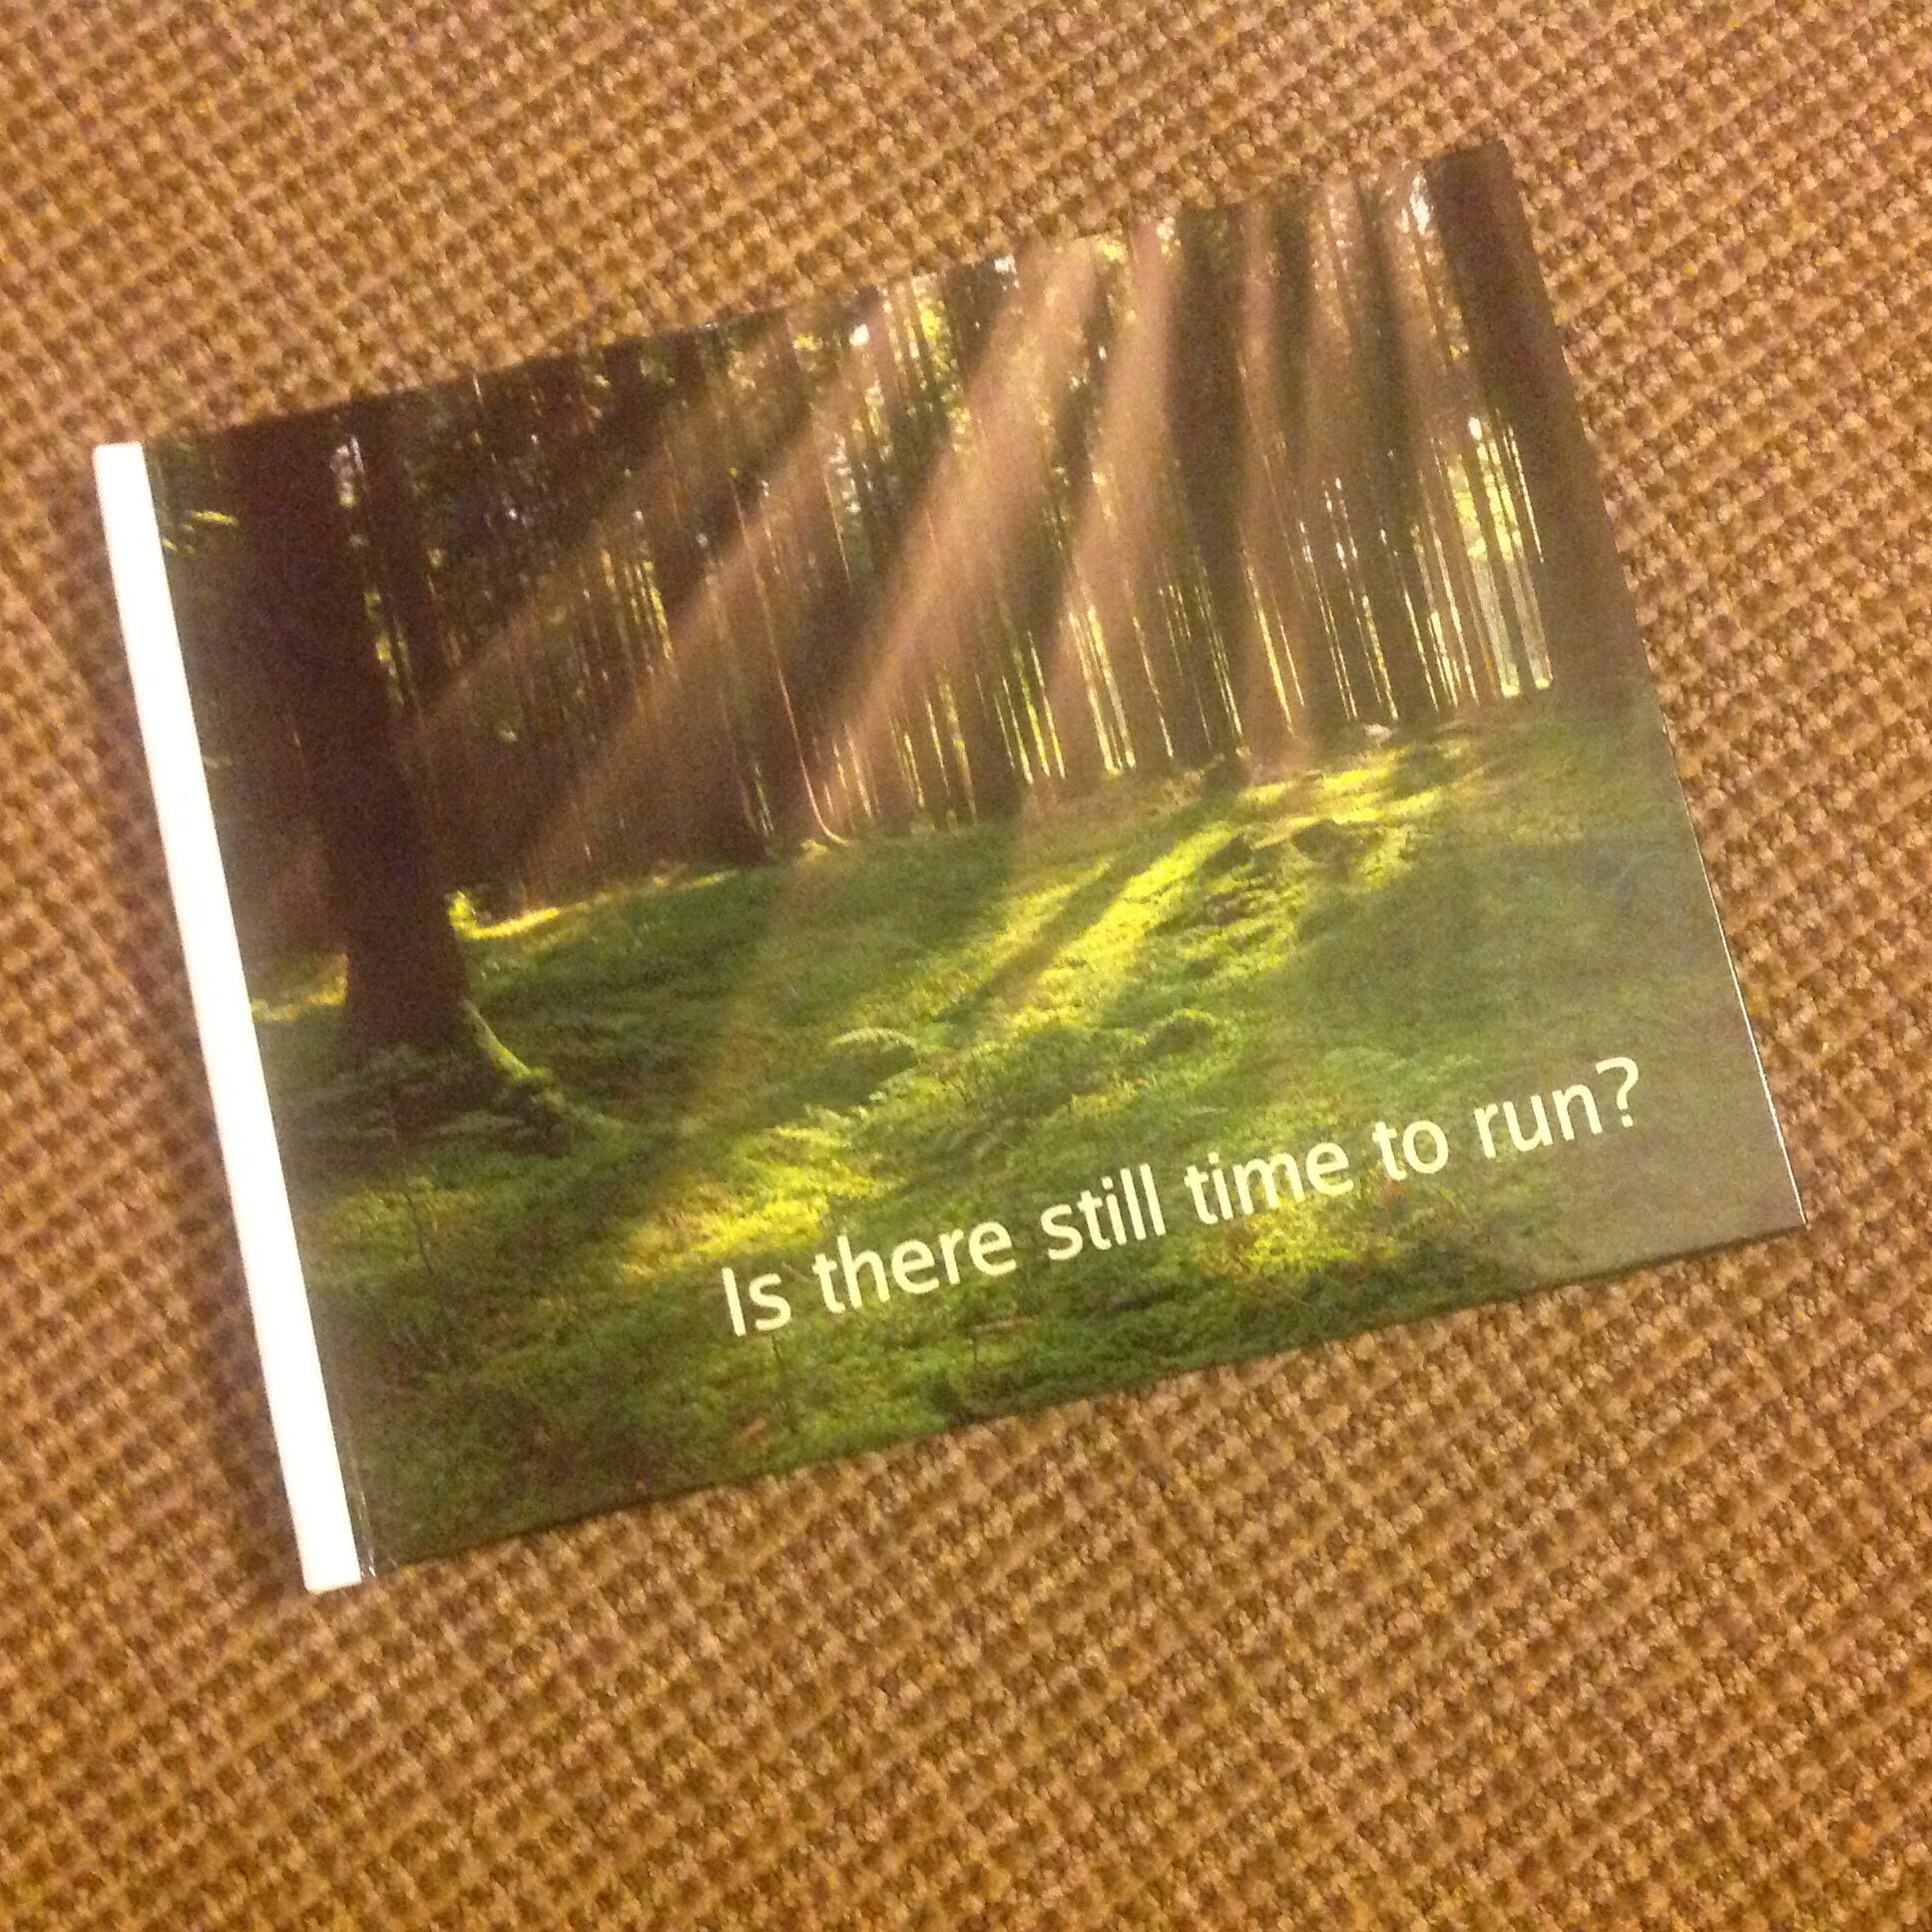 Photo of "is there still time to run?" waiting room therapy book by Bergen and Associates Counselling